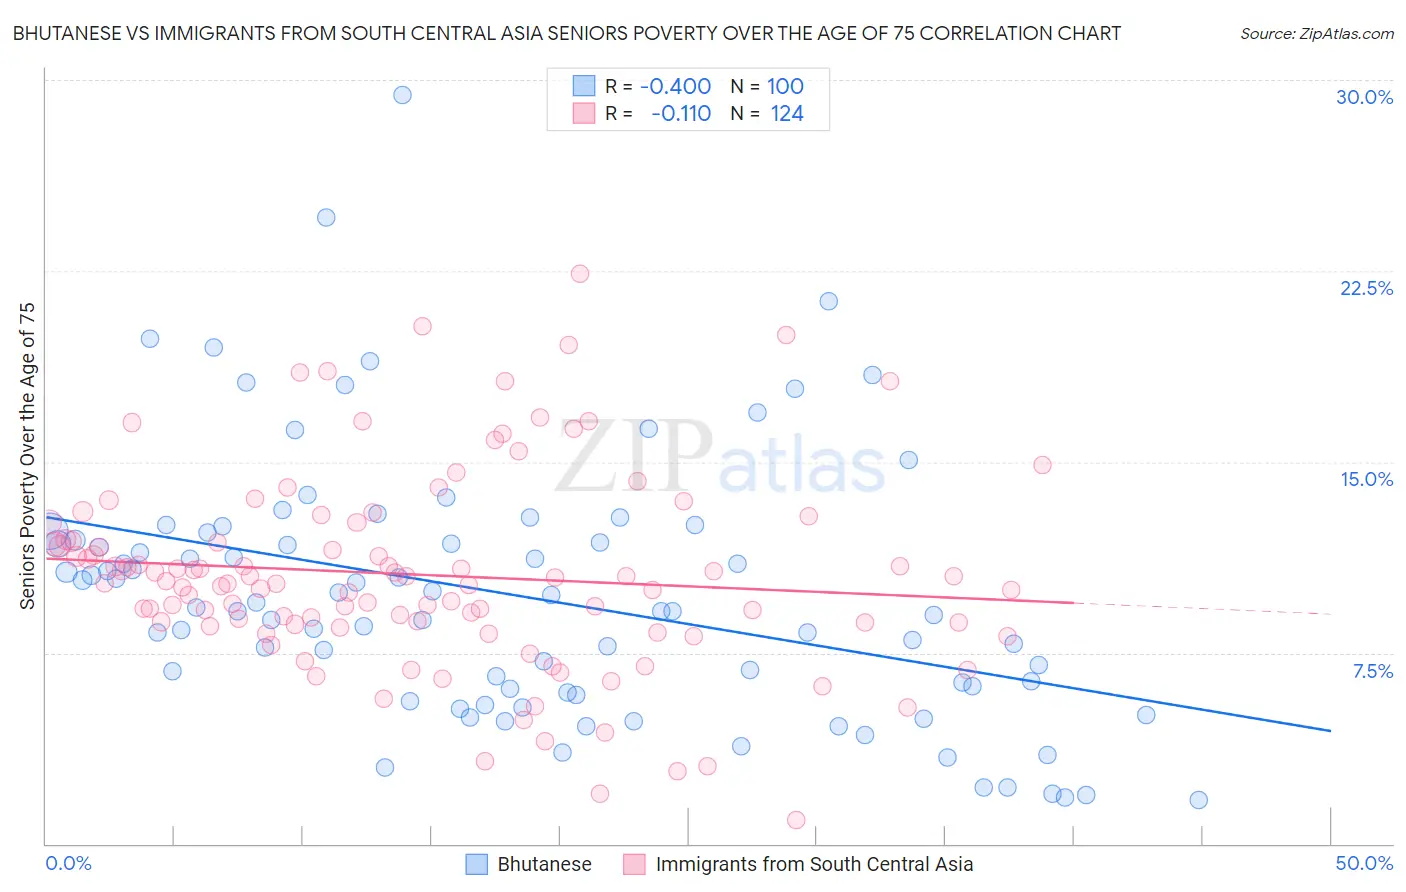 Bhutanese vs Immigrants from South Central Asia Seniors Poverty Over the Age of 75